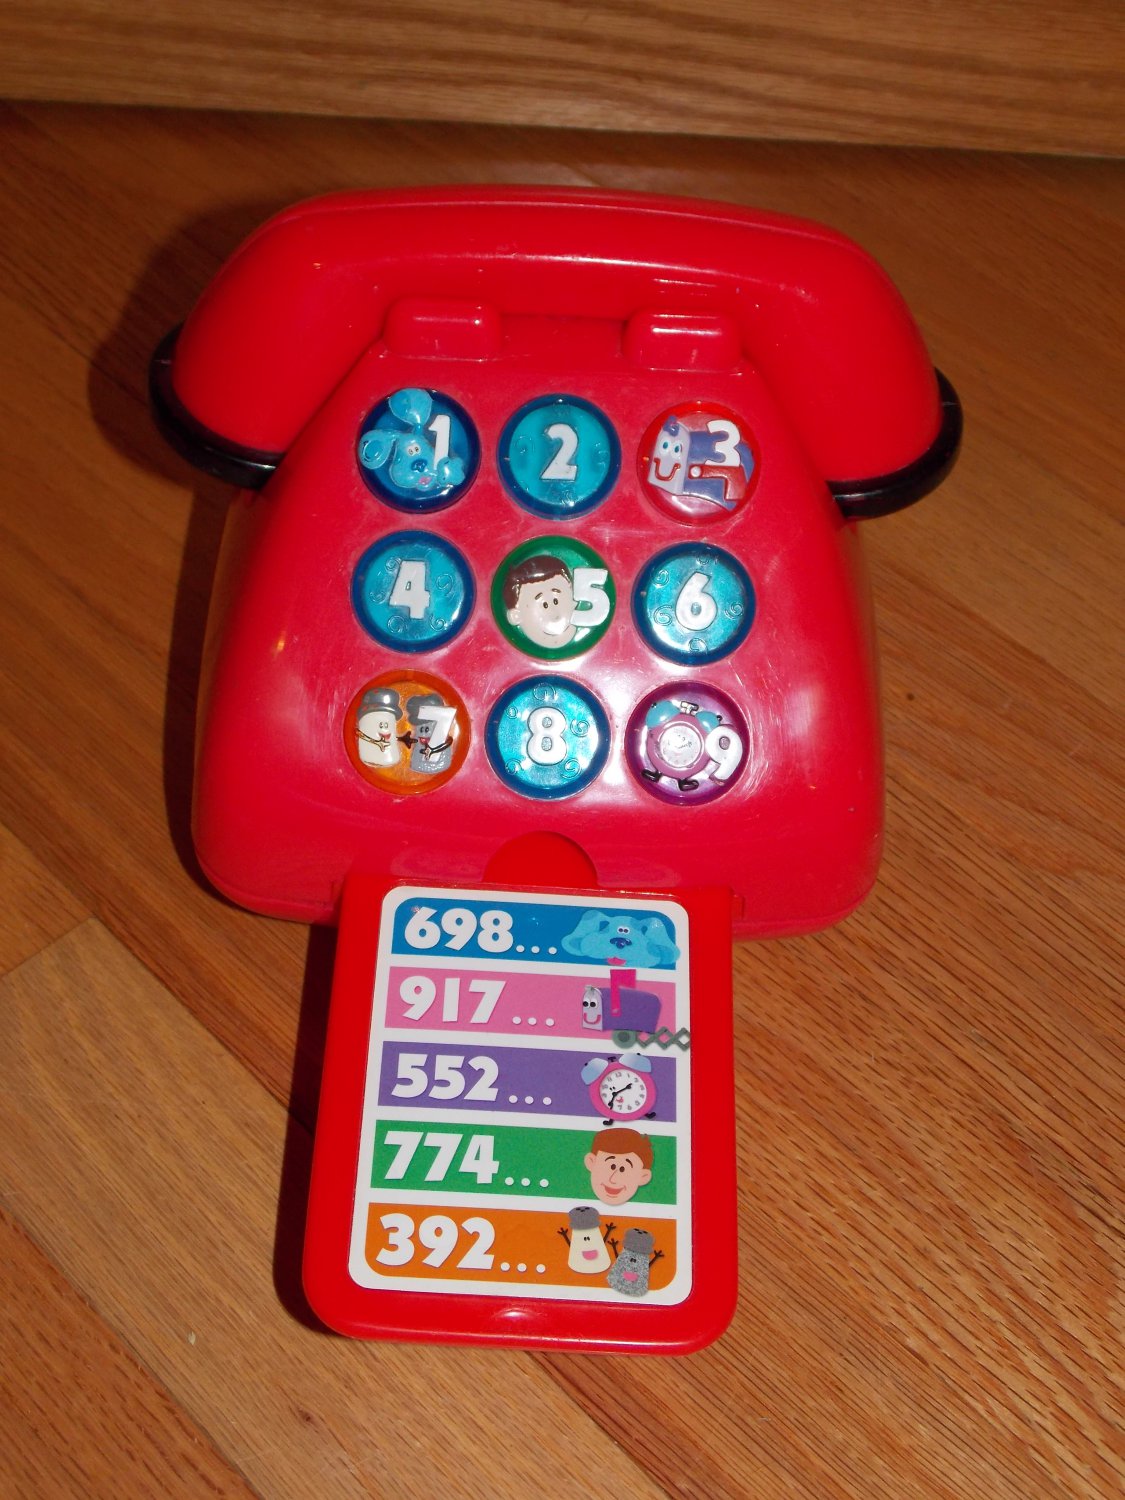 An image of a red toy phone. The odd numbers on the phone have a Blue's Clues character on it. 1 has Blue on it, 3 has Mailbox on it, 5 has Steve on it, 7 has Mr. Salt and Mrs. Pepper on it, and 9 has Tickety Tock on it. A flat tray is pulled out of the bottom of the phone and has an image of different numbers that correspond with different characters. Blue is on the top with the number 698, below her is Mailbox with the number 917, below him is Tickety with the number 552, below her is Steve with the number 774, and below him is Mr. Salt and Mrs. Pepper with the number 392.